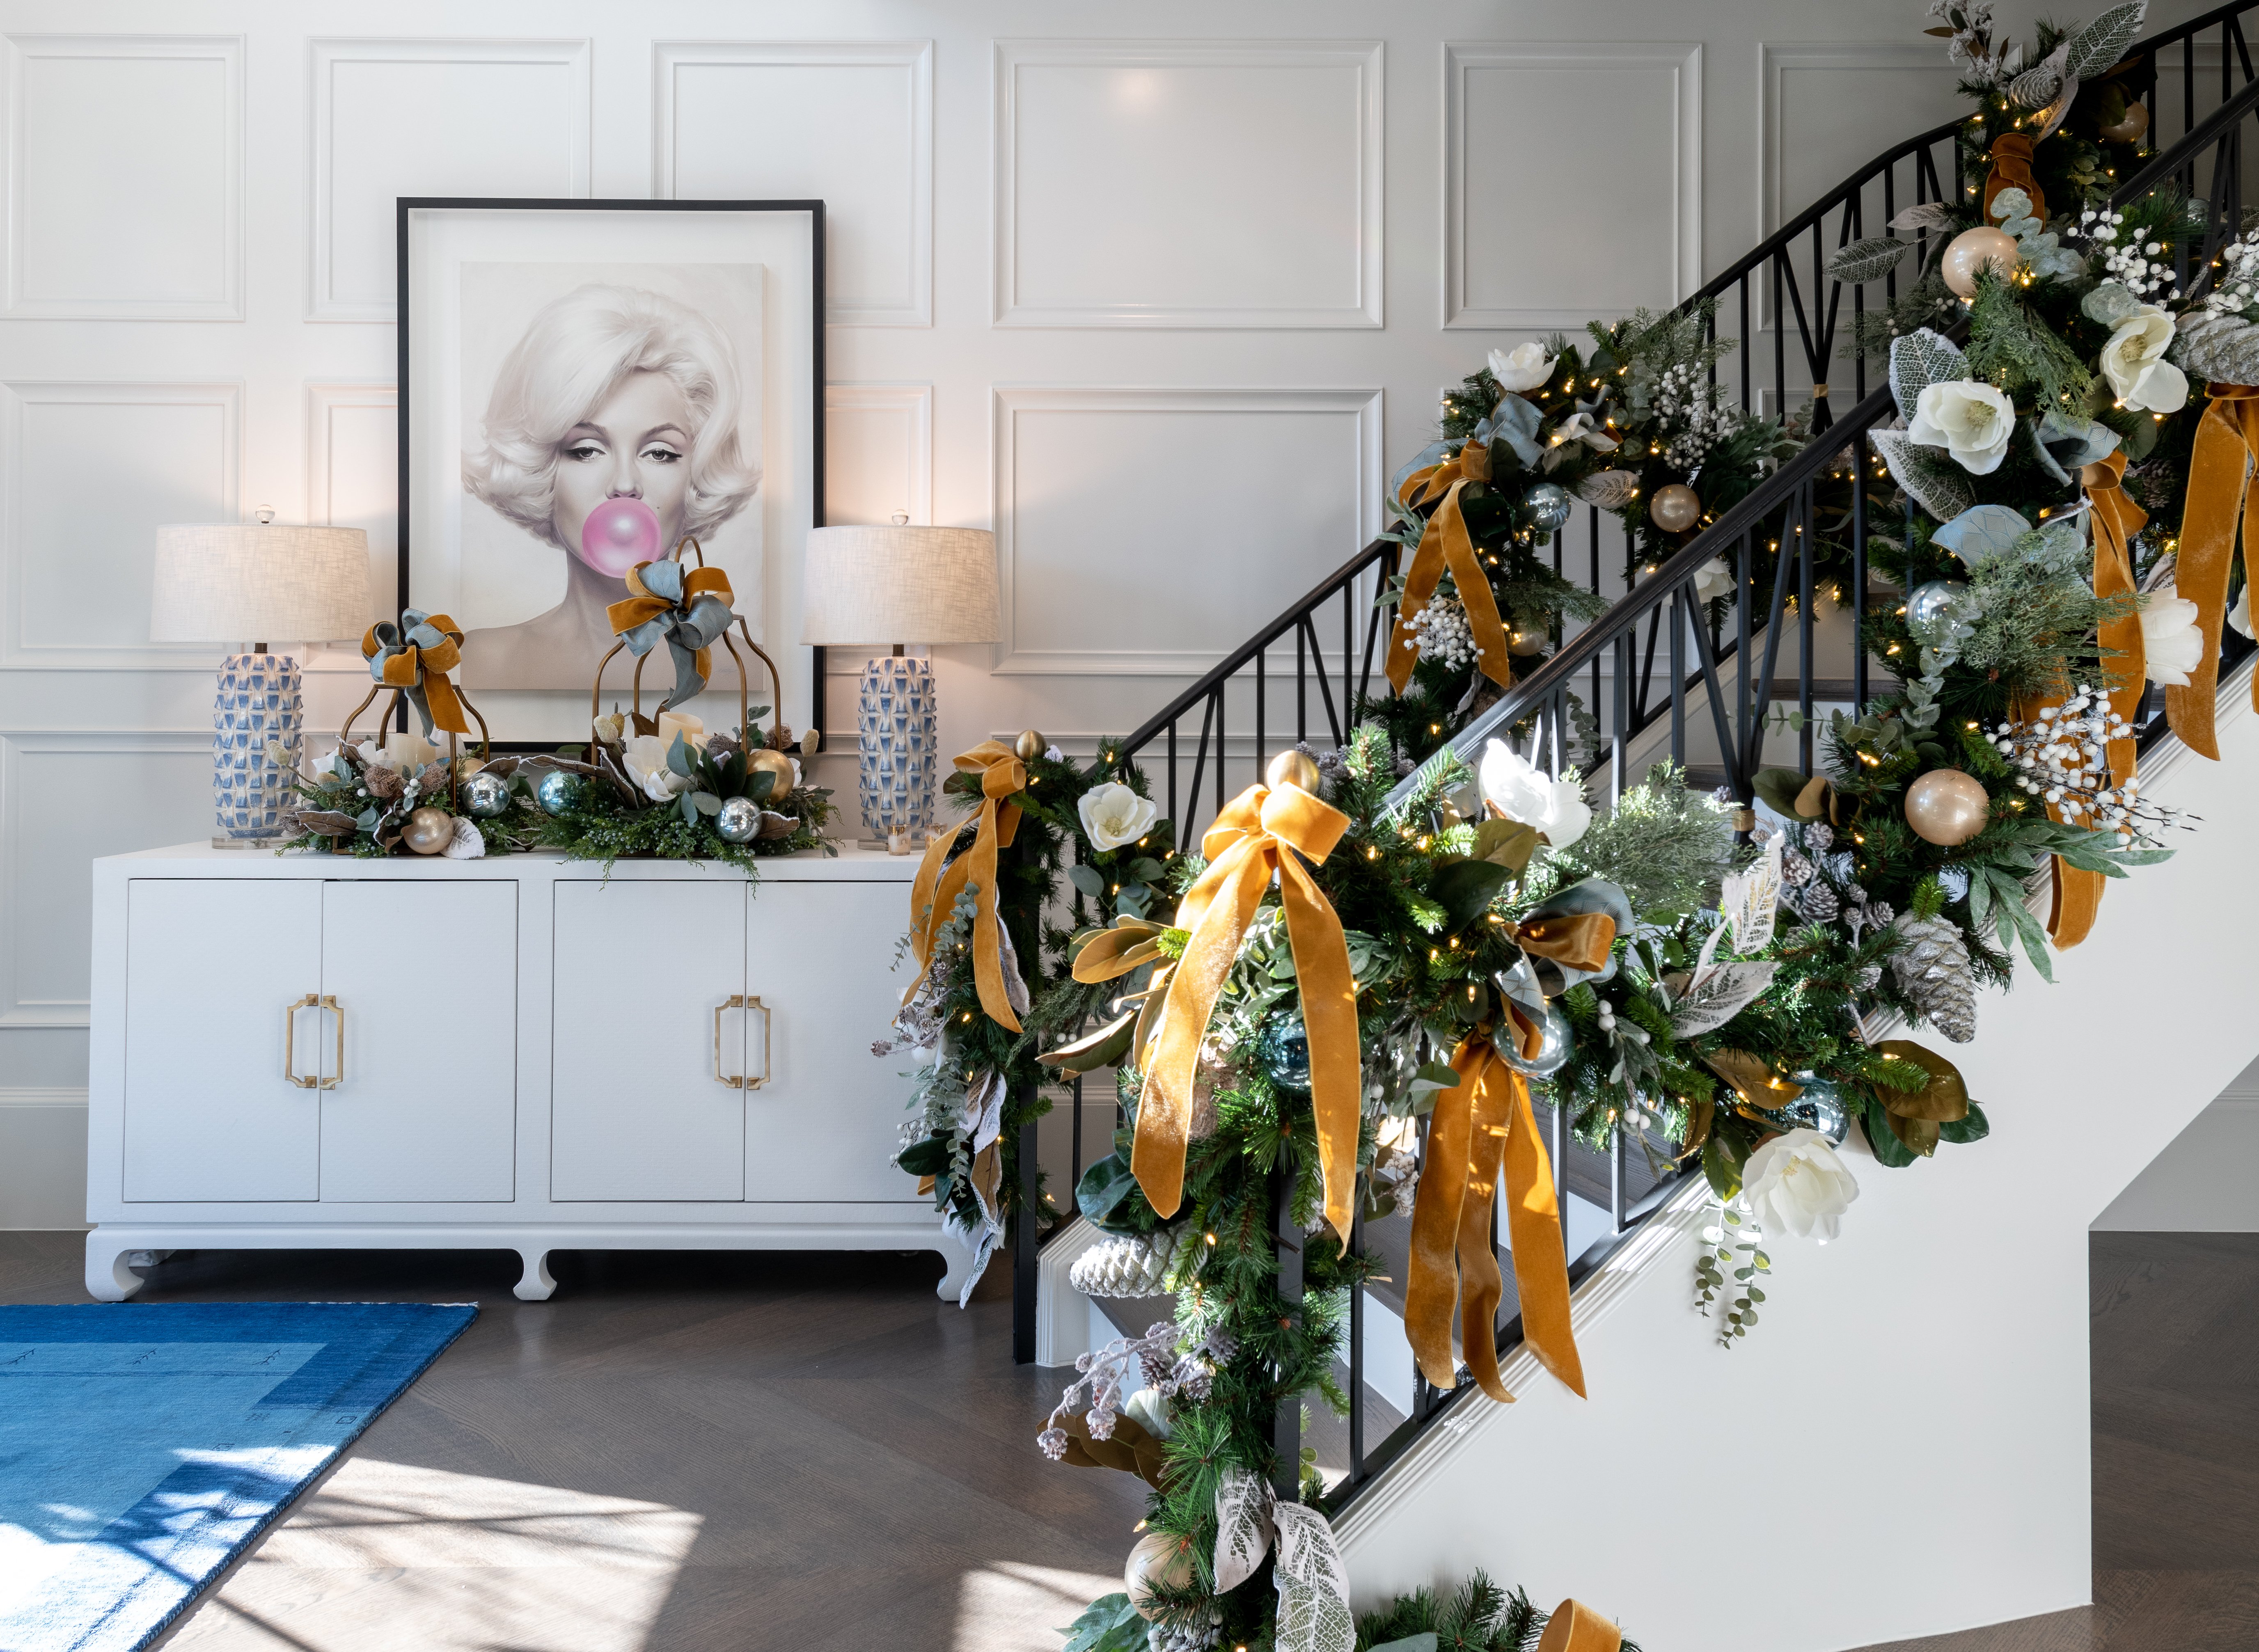 Staircase adorned with greenery and yellow ribbons in home entryway